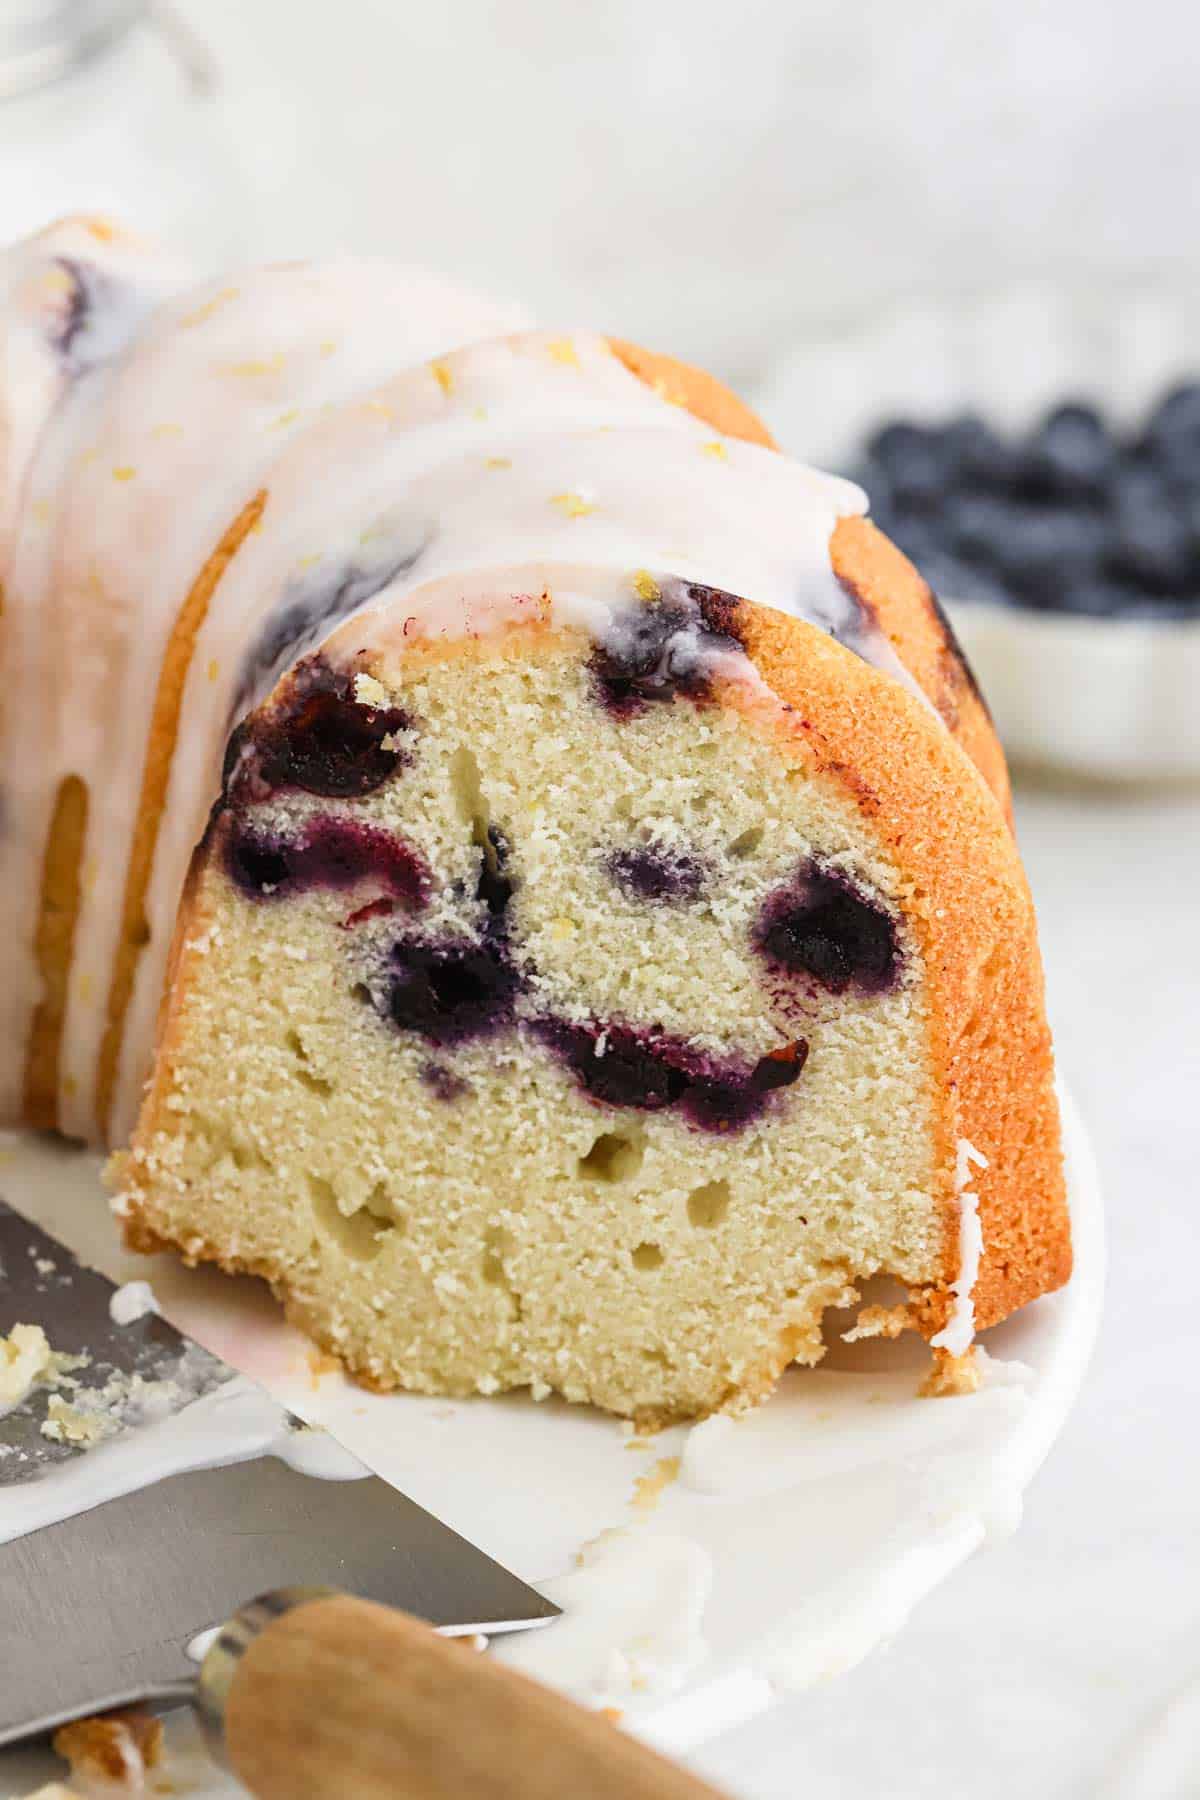 Lemon blueberry cake cut to show the inside studded with blueberries and a glaze and lemon zest on top.